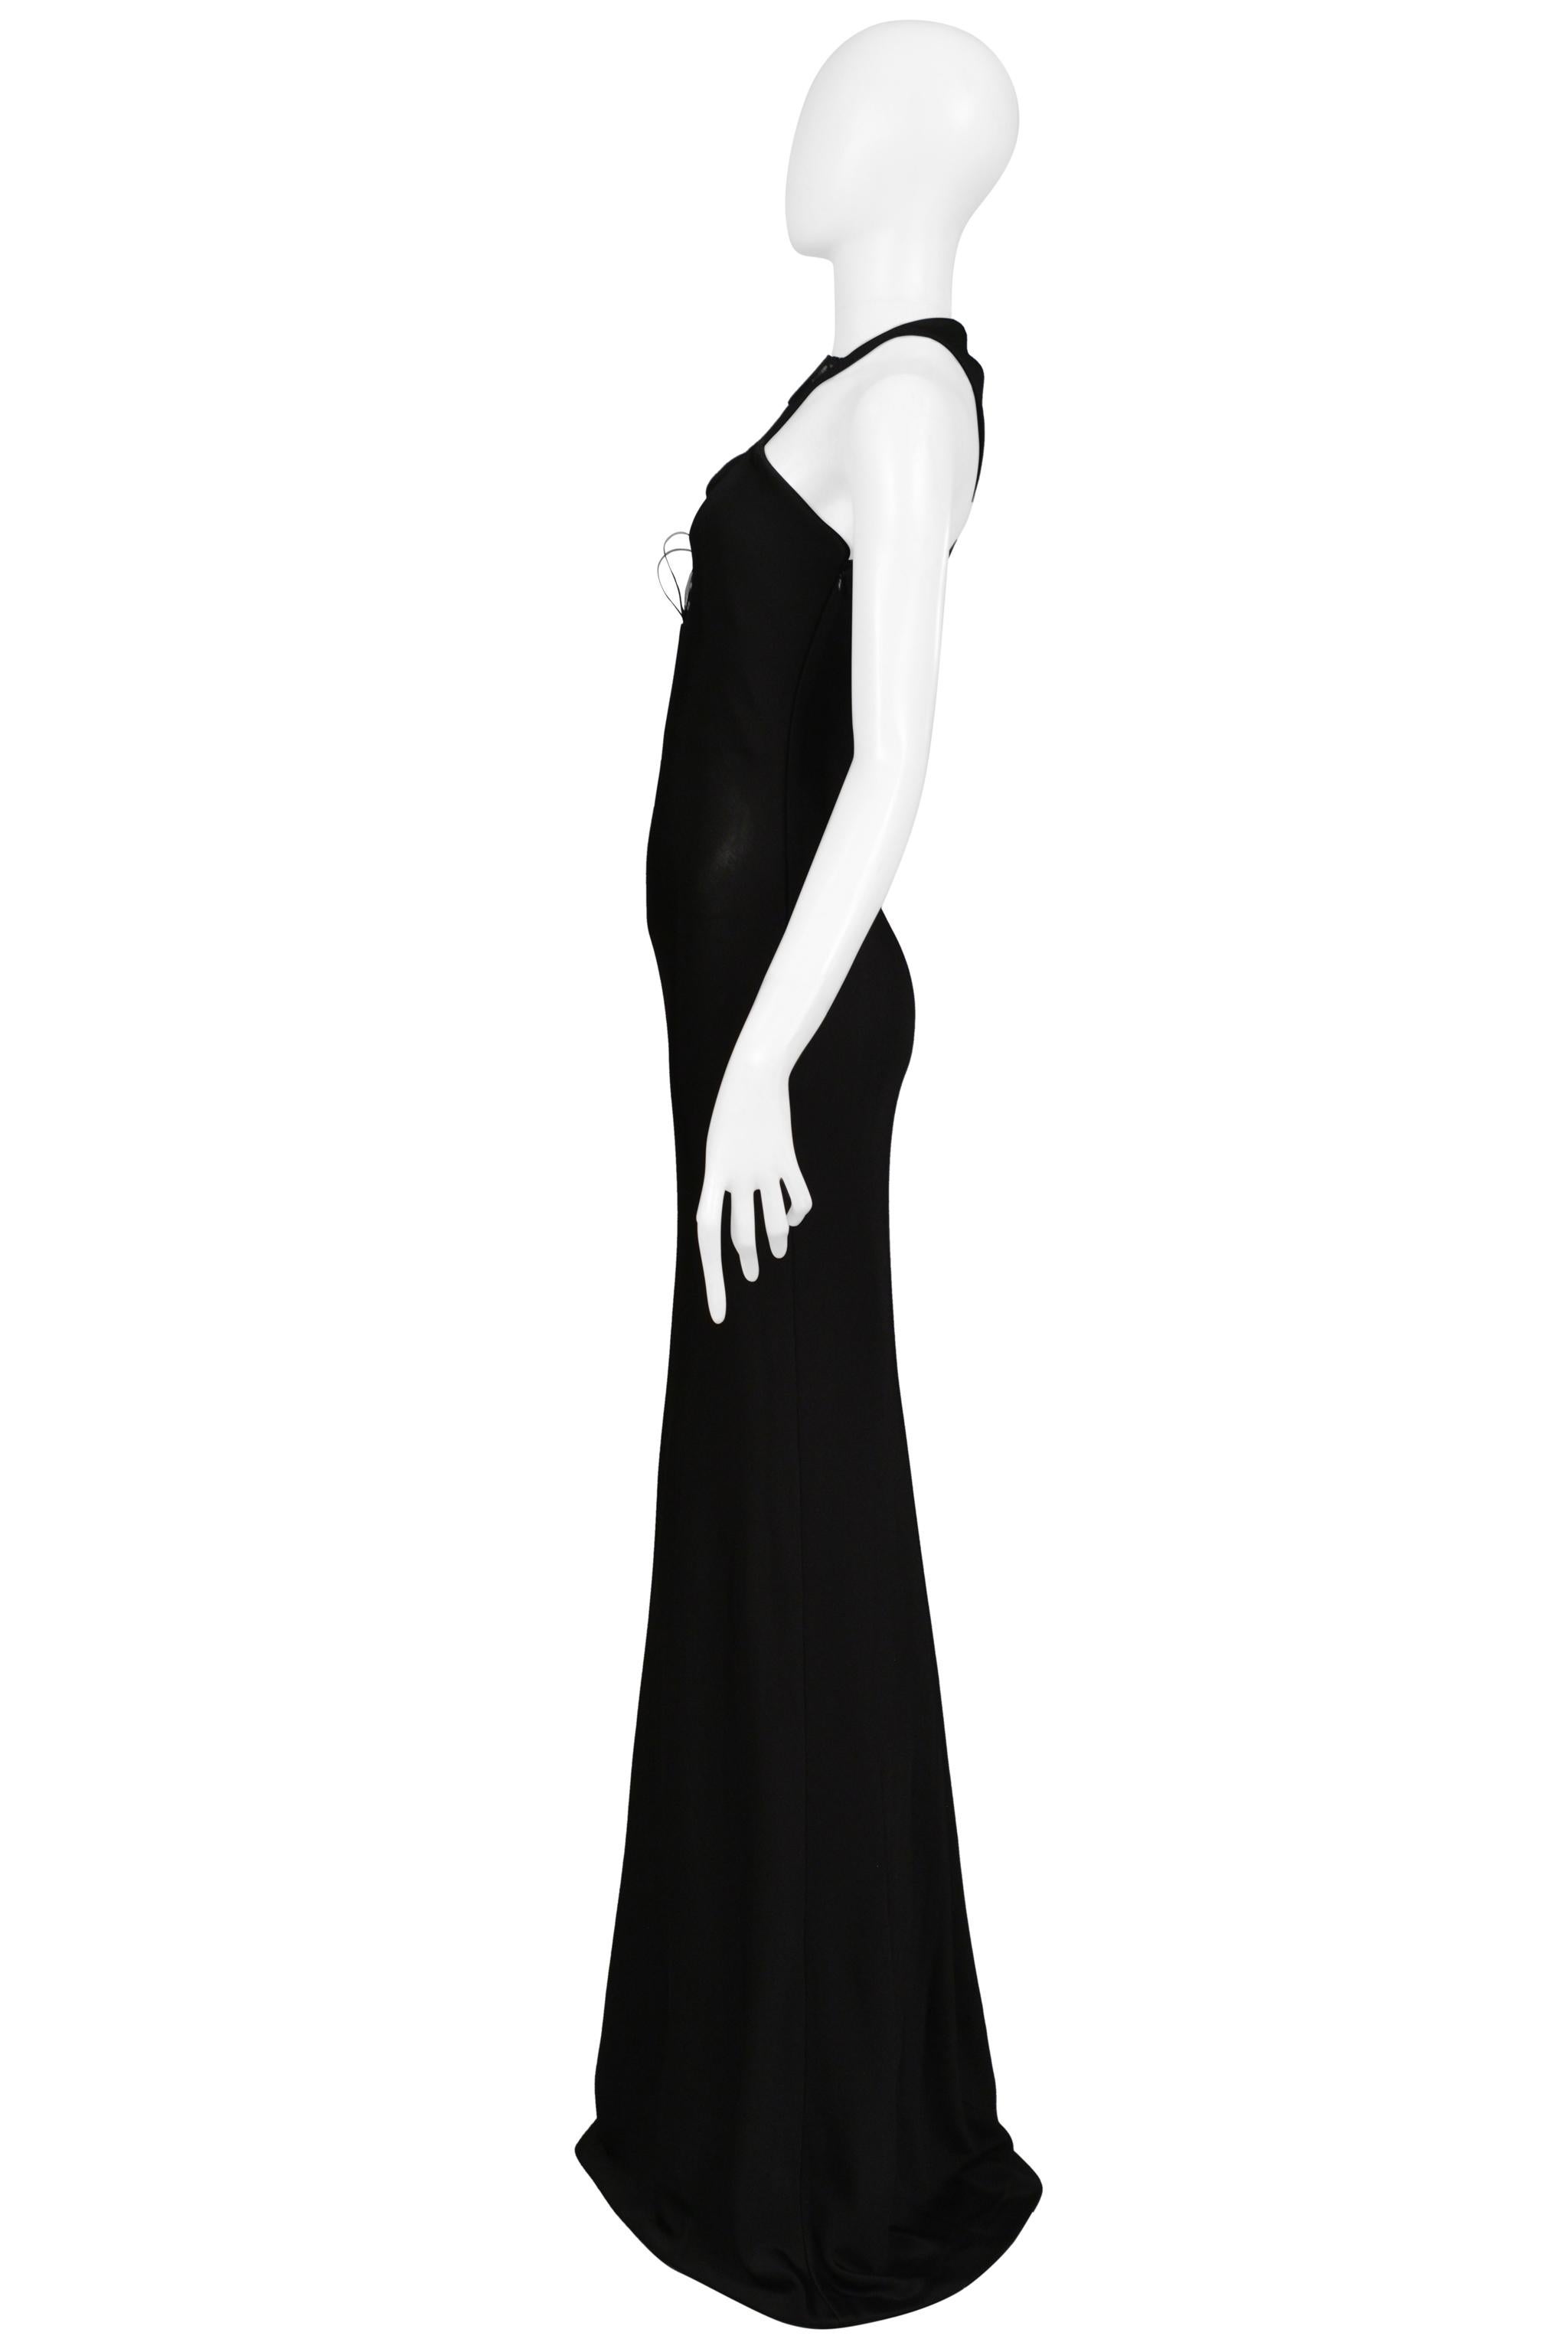 Sophia Kokosalaki Black Architectural Evening Gown With Intricate Bodice 2008 For Sale 3